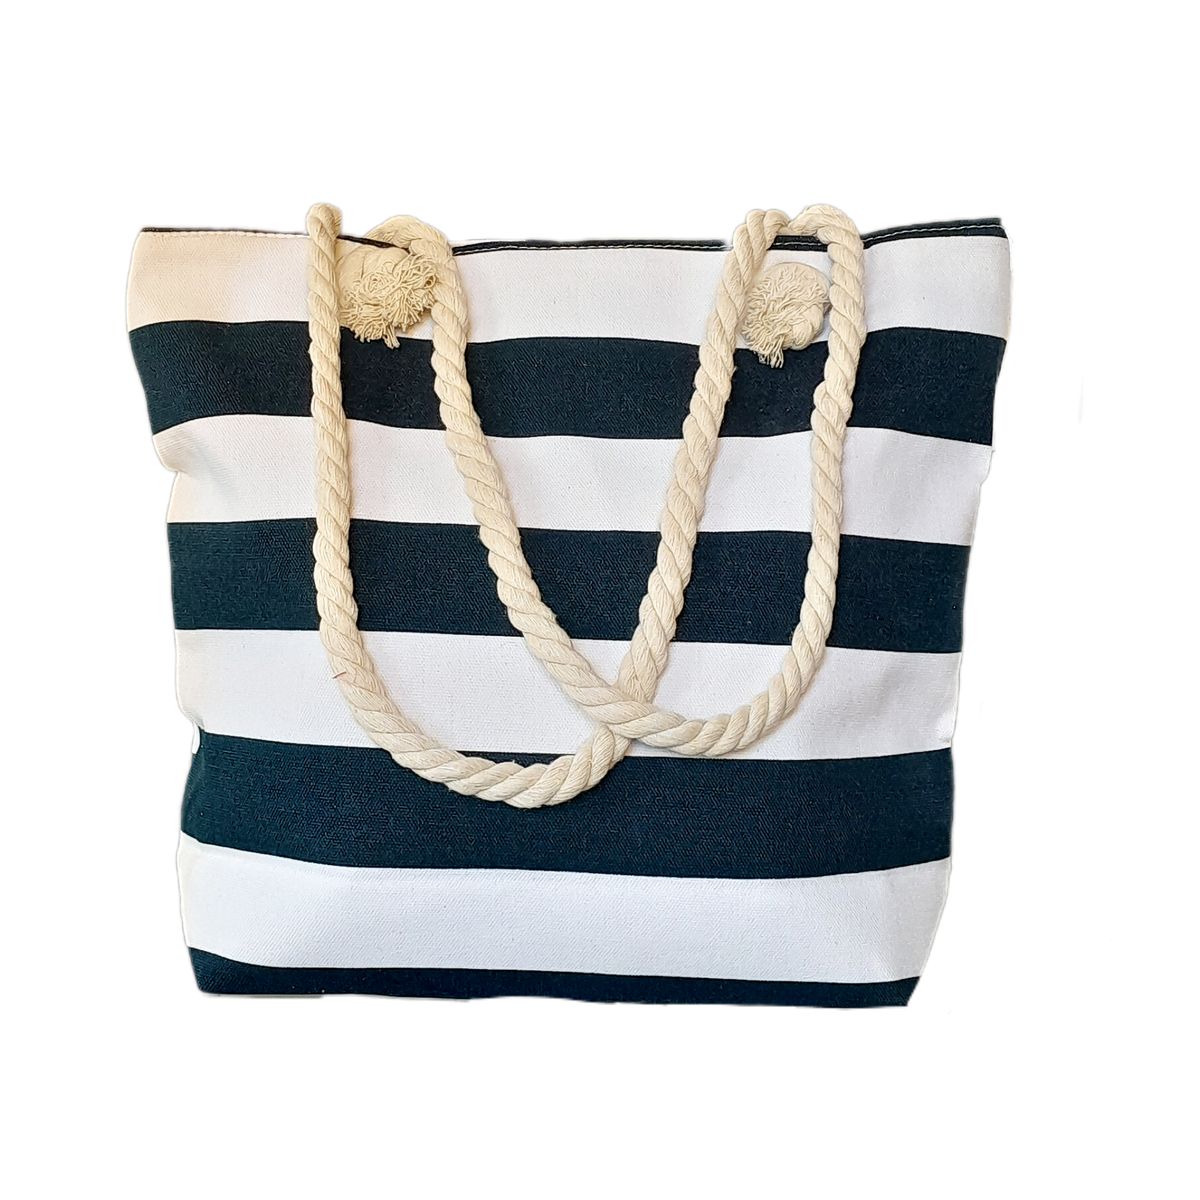 Stripped Beach Bags | Shop Today. Get it Tomorrow! | takealot.com